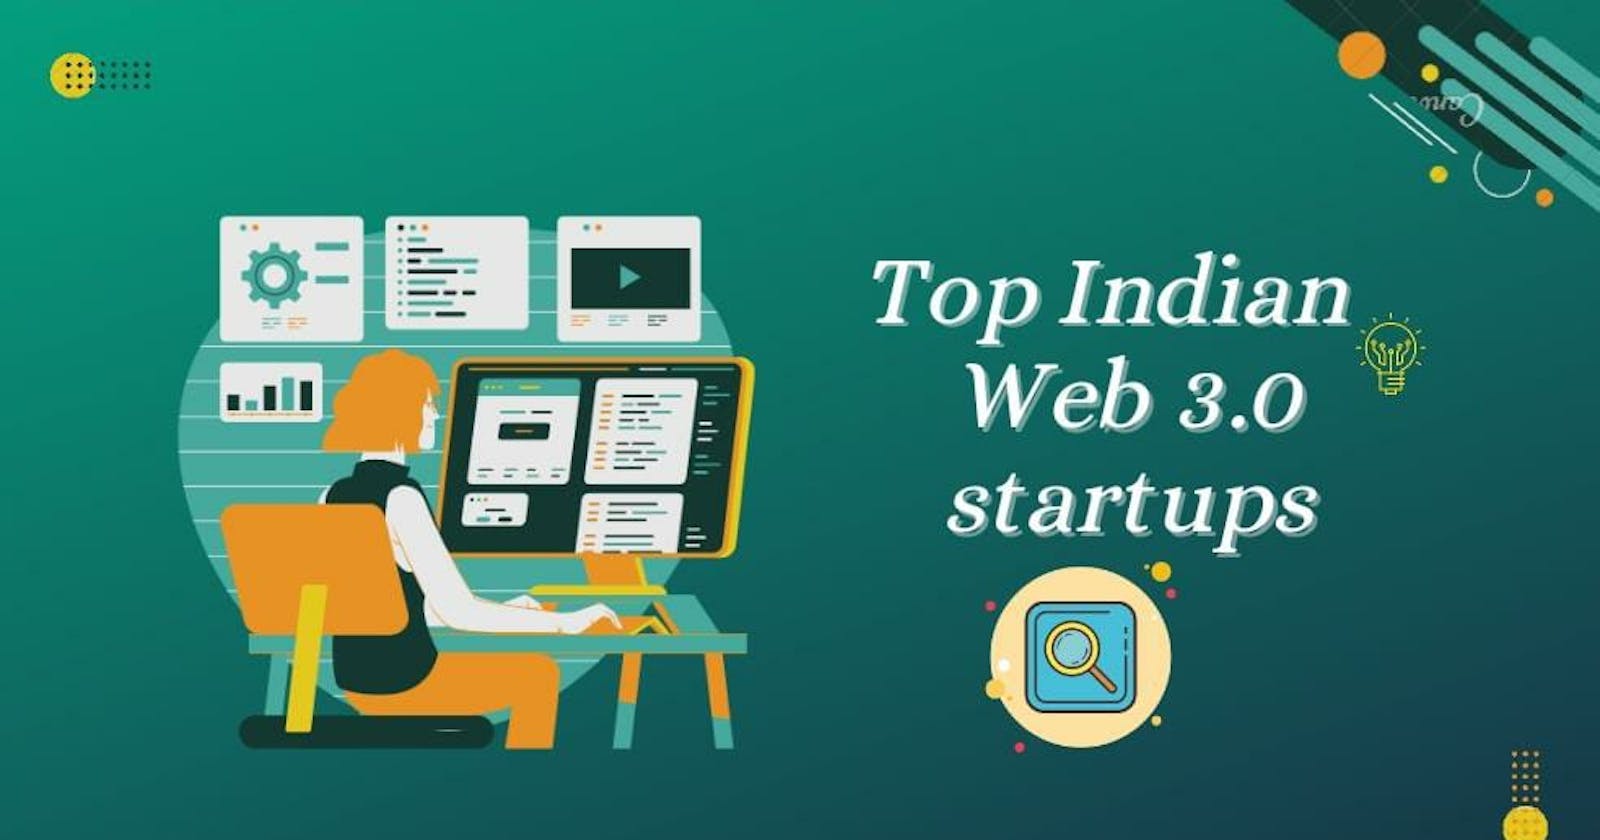 Top 10 Web 3.0 Startups That Are Revolutionizing The Web In 2022